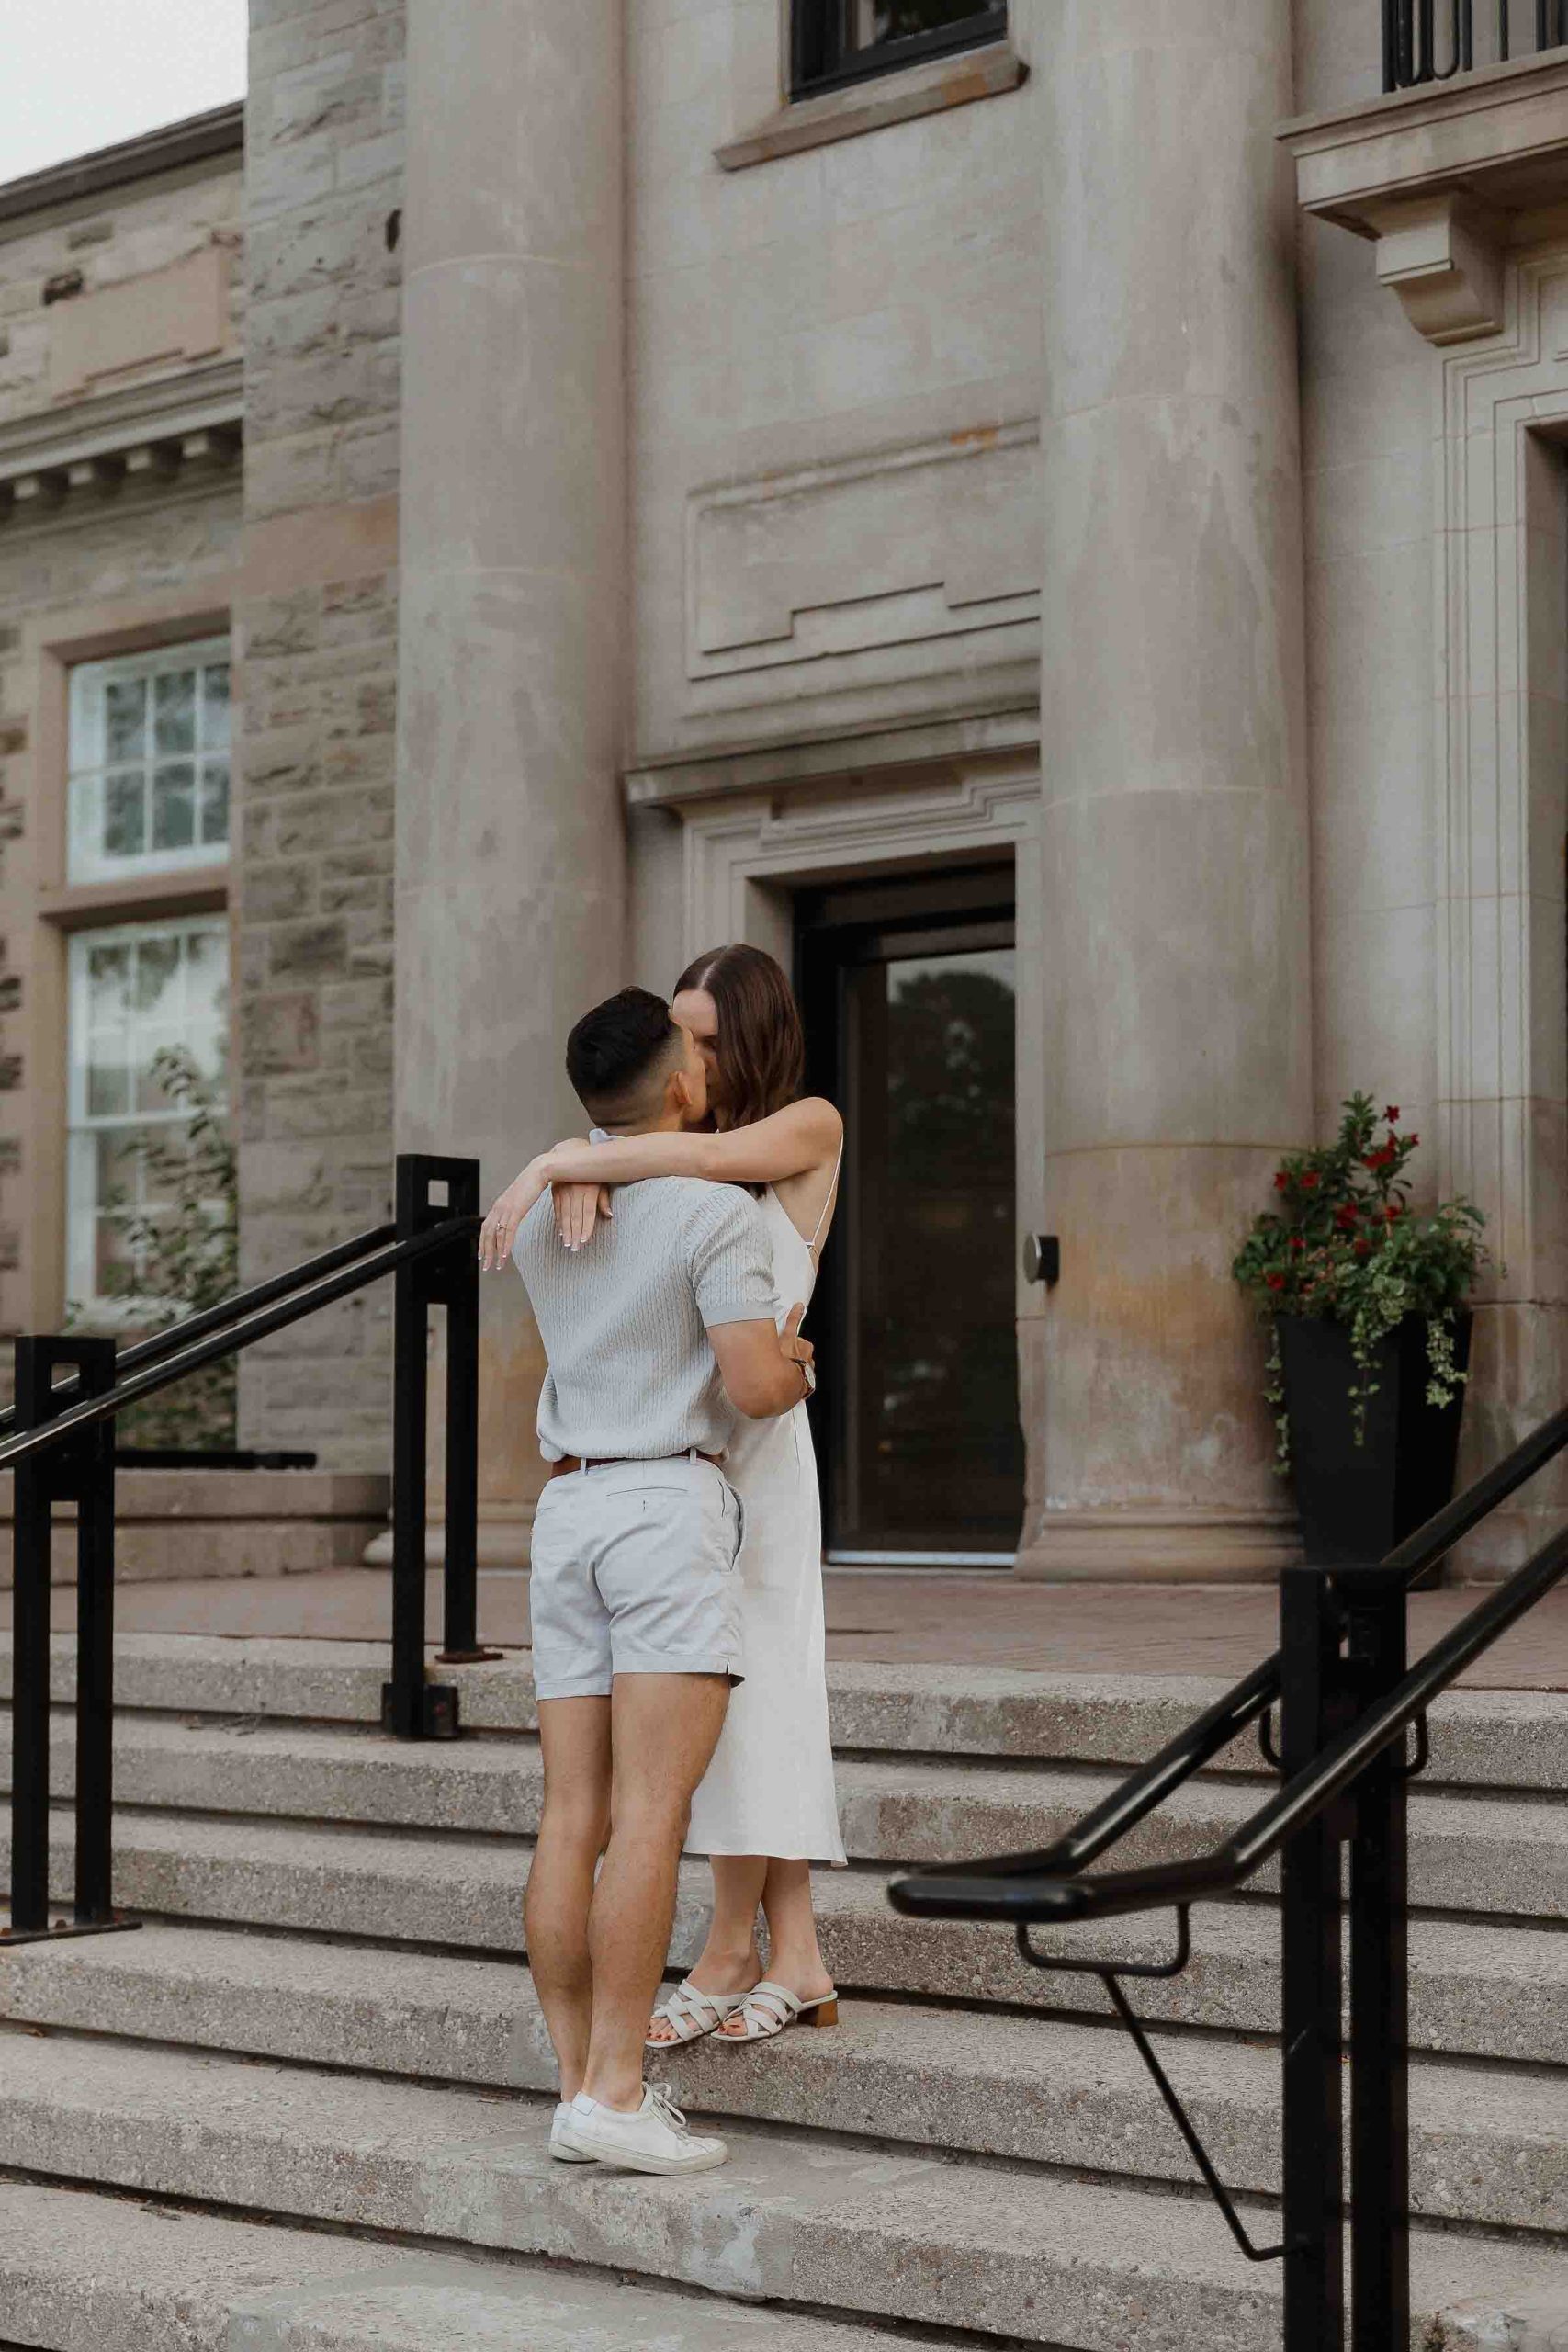 Engagement photos at Guelph University outside the old buildings | Sonia V Photography kissing on stairs